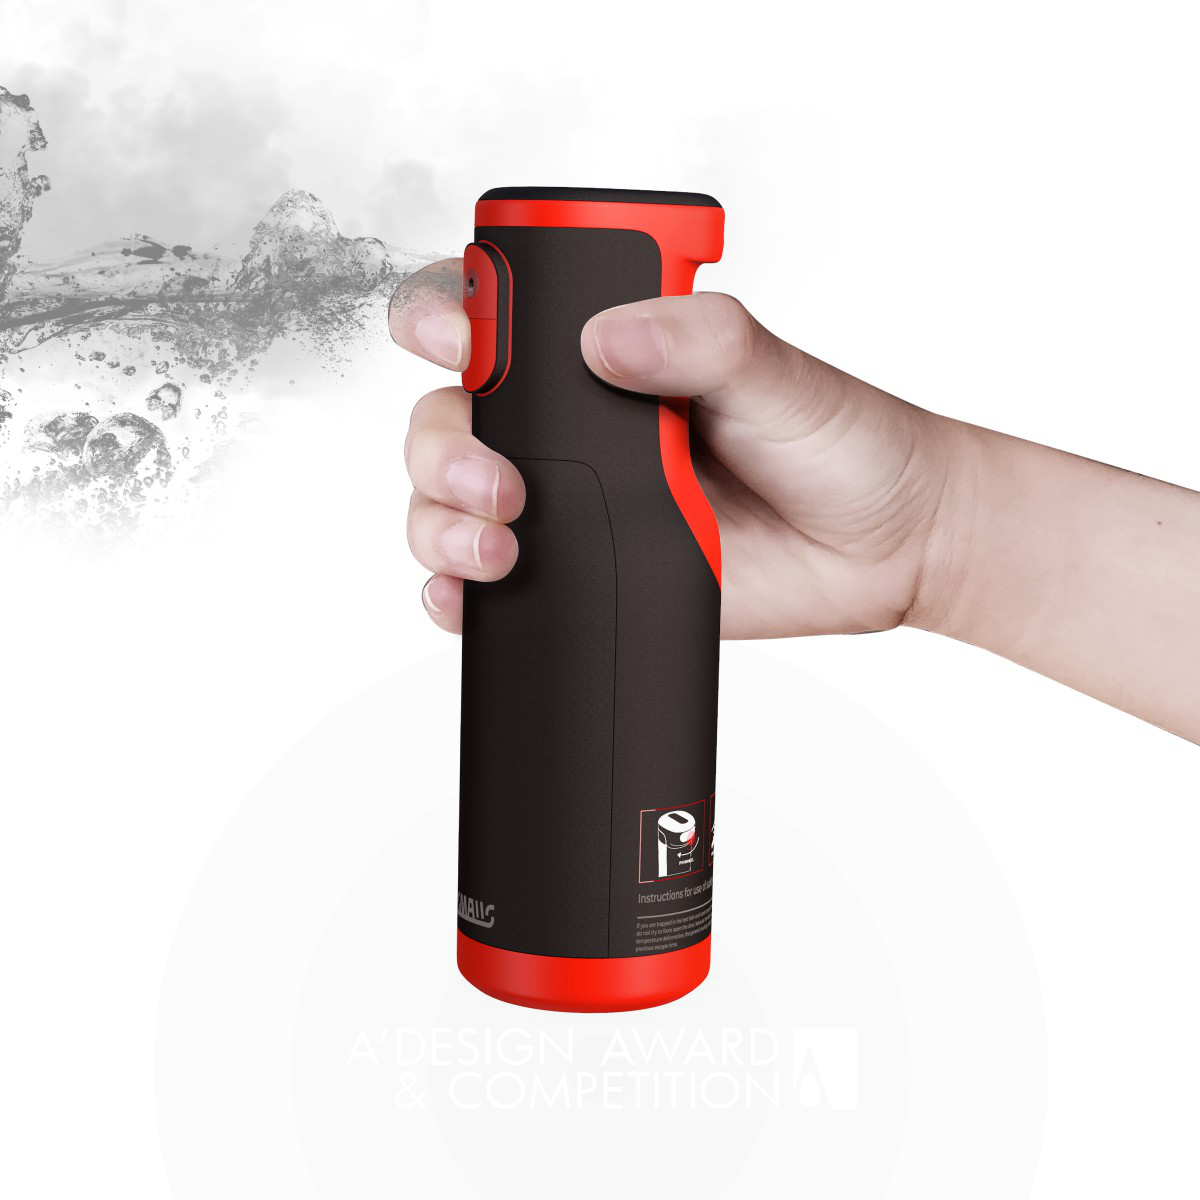 FZ Fire Extinguisher and Escape Hammer